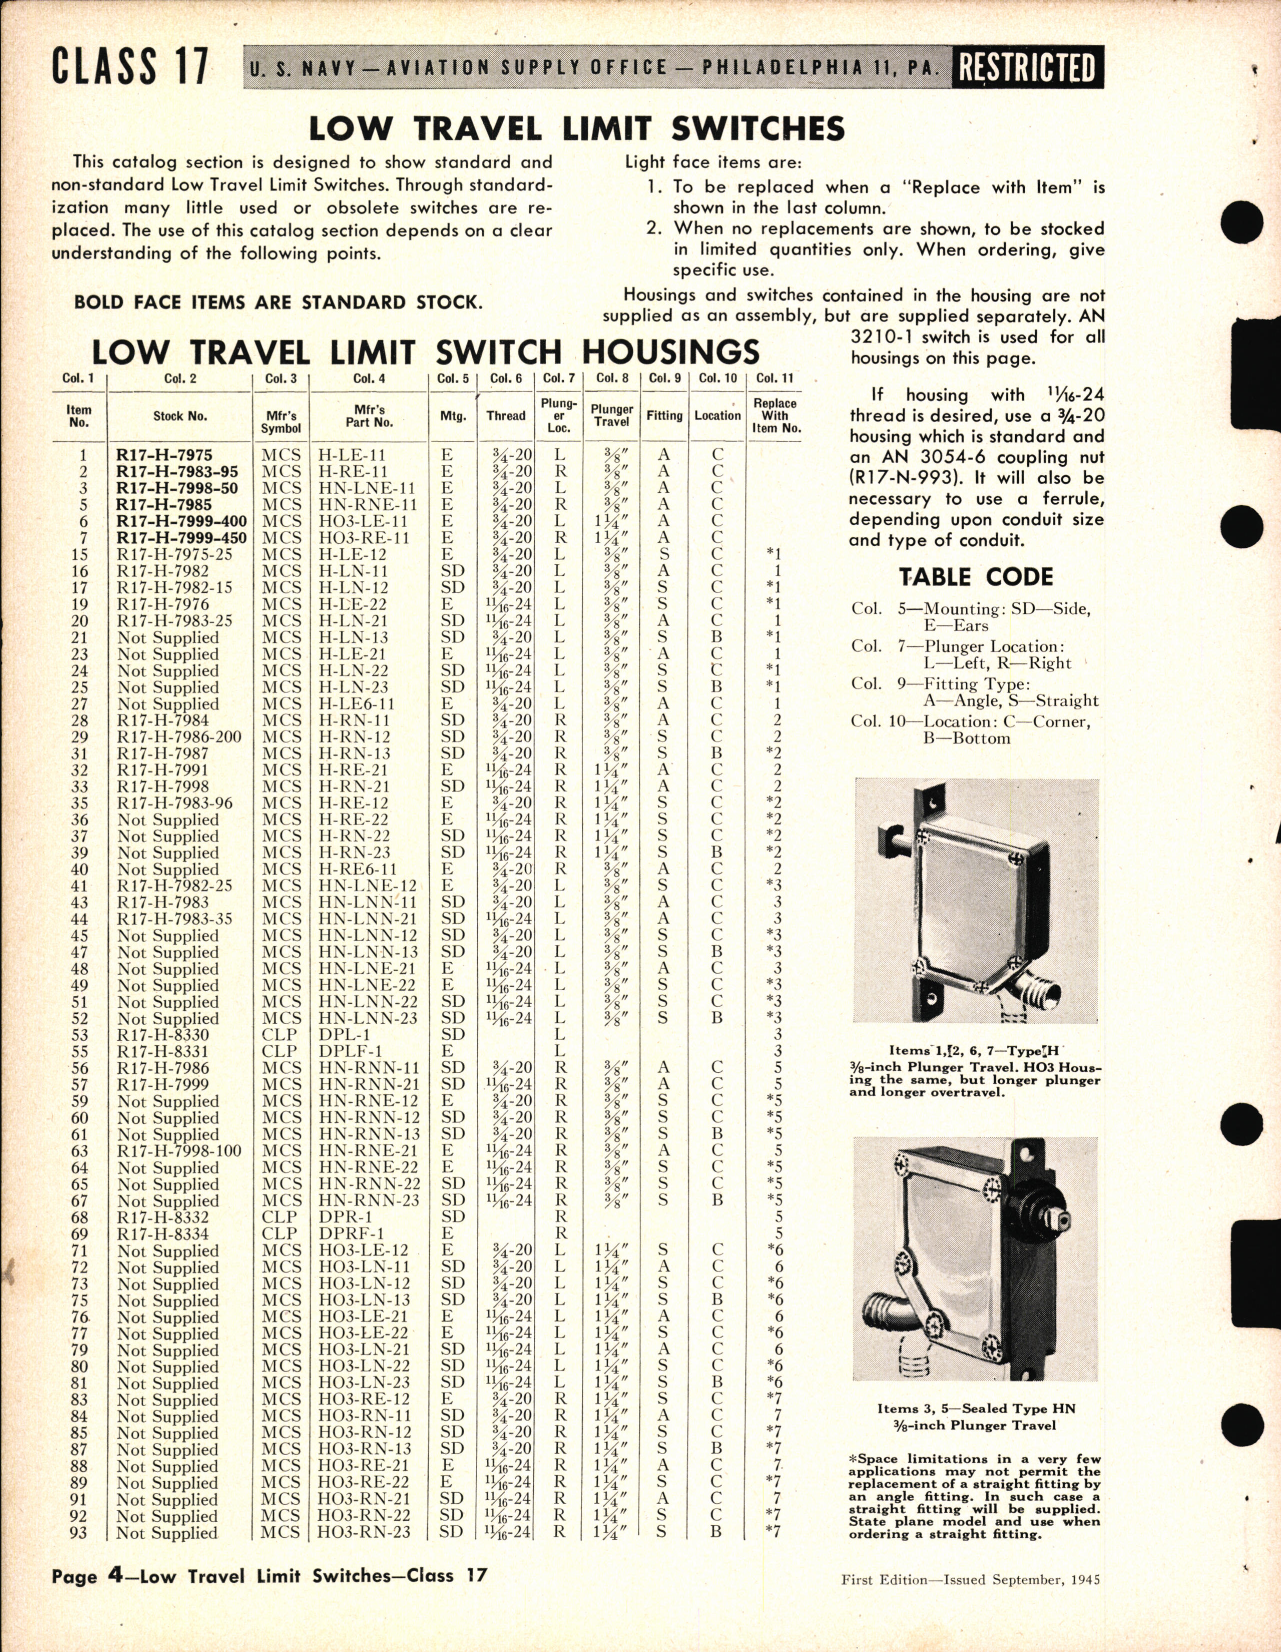 Sample page 4 from AirCorps Library document: Low Travel Limit Switches